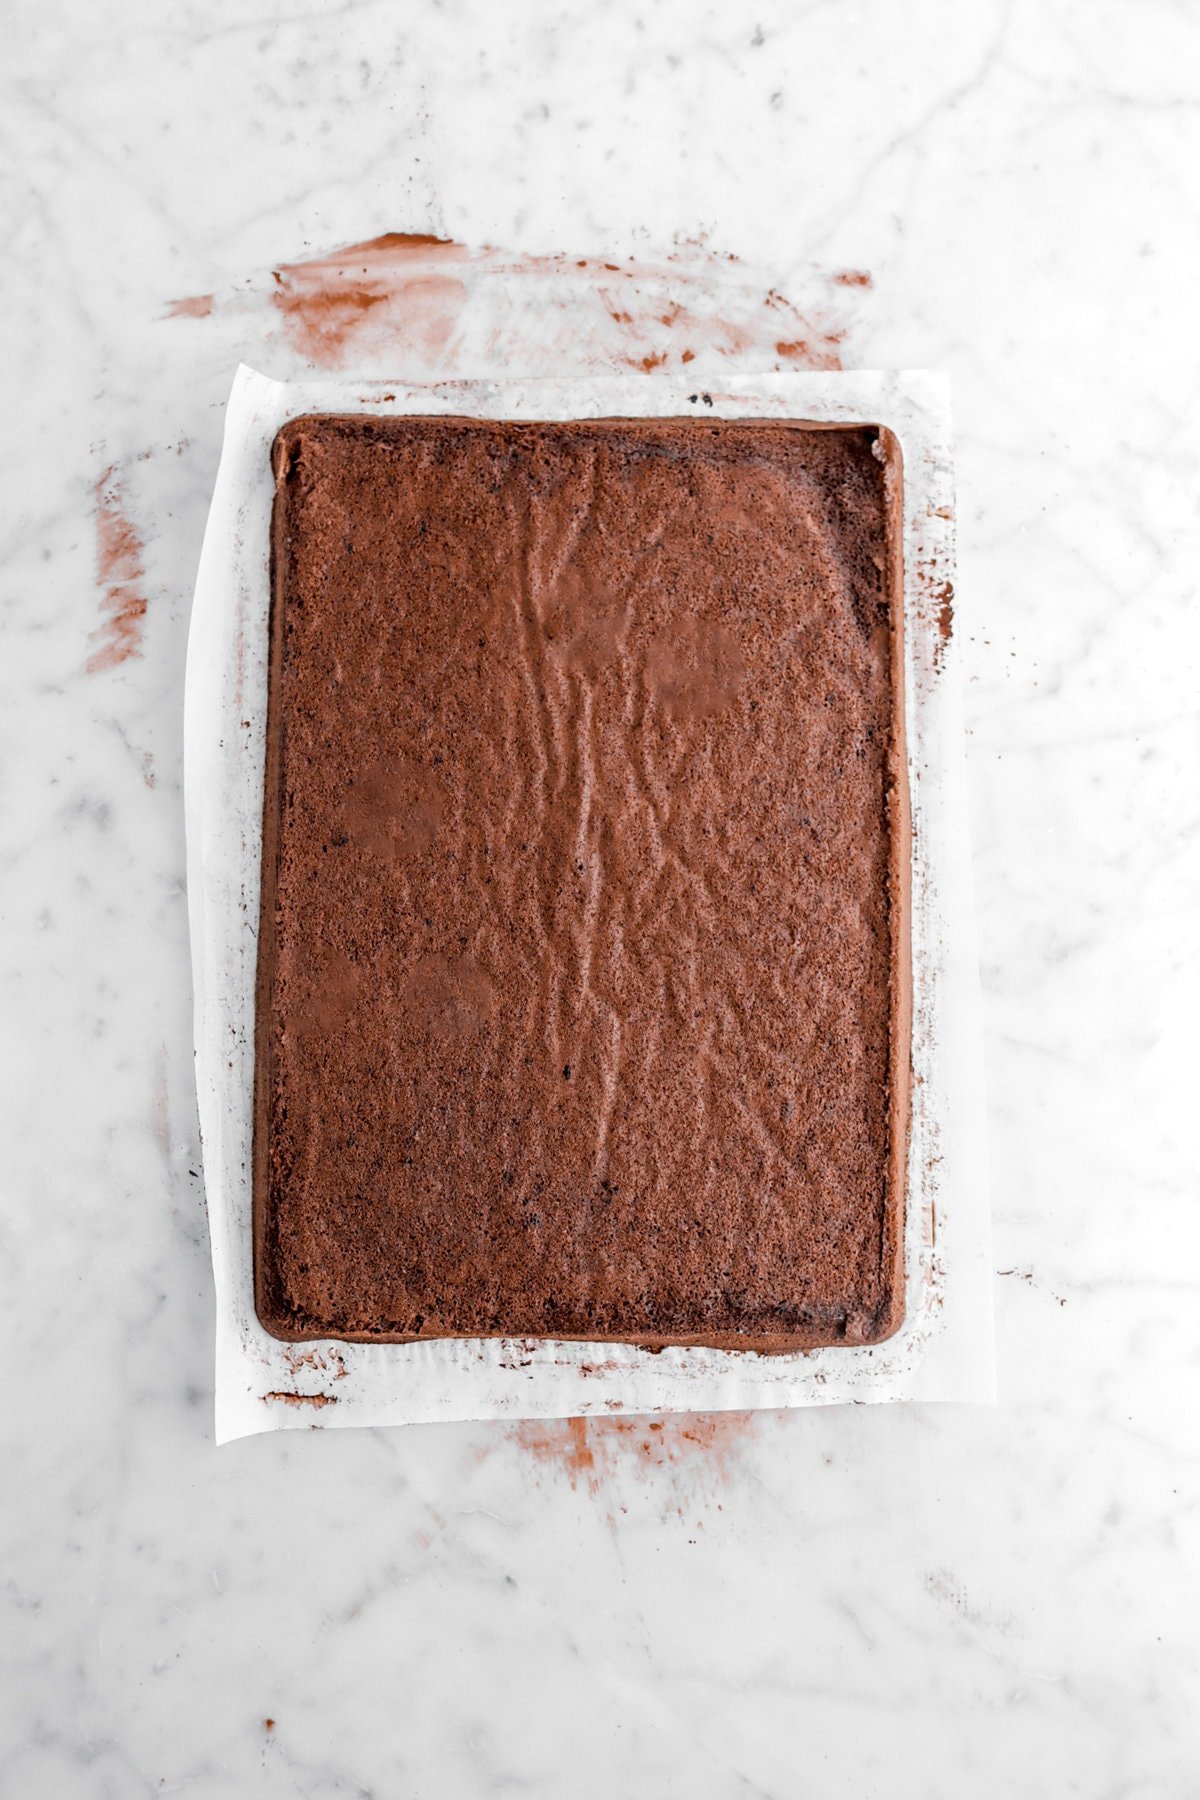 chocolate cake on parchment paper.